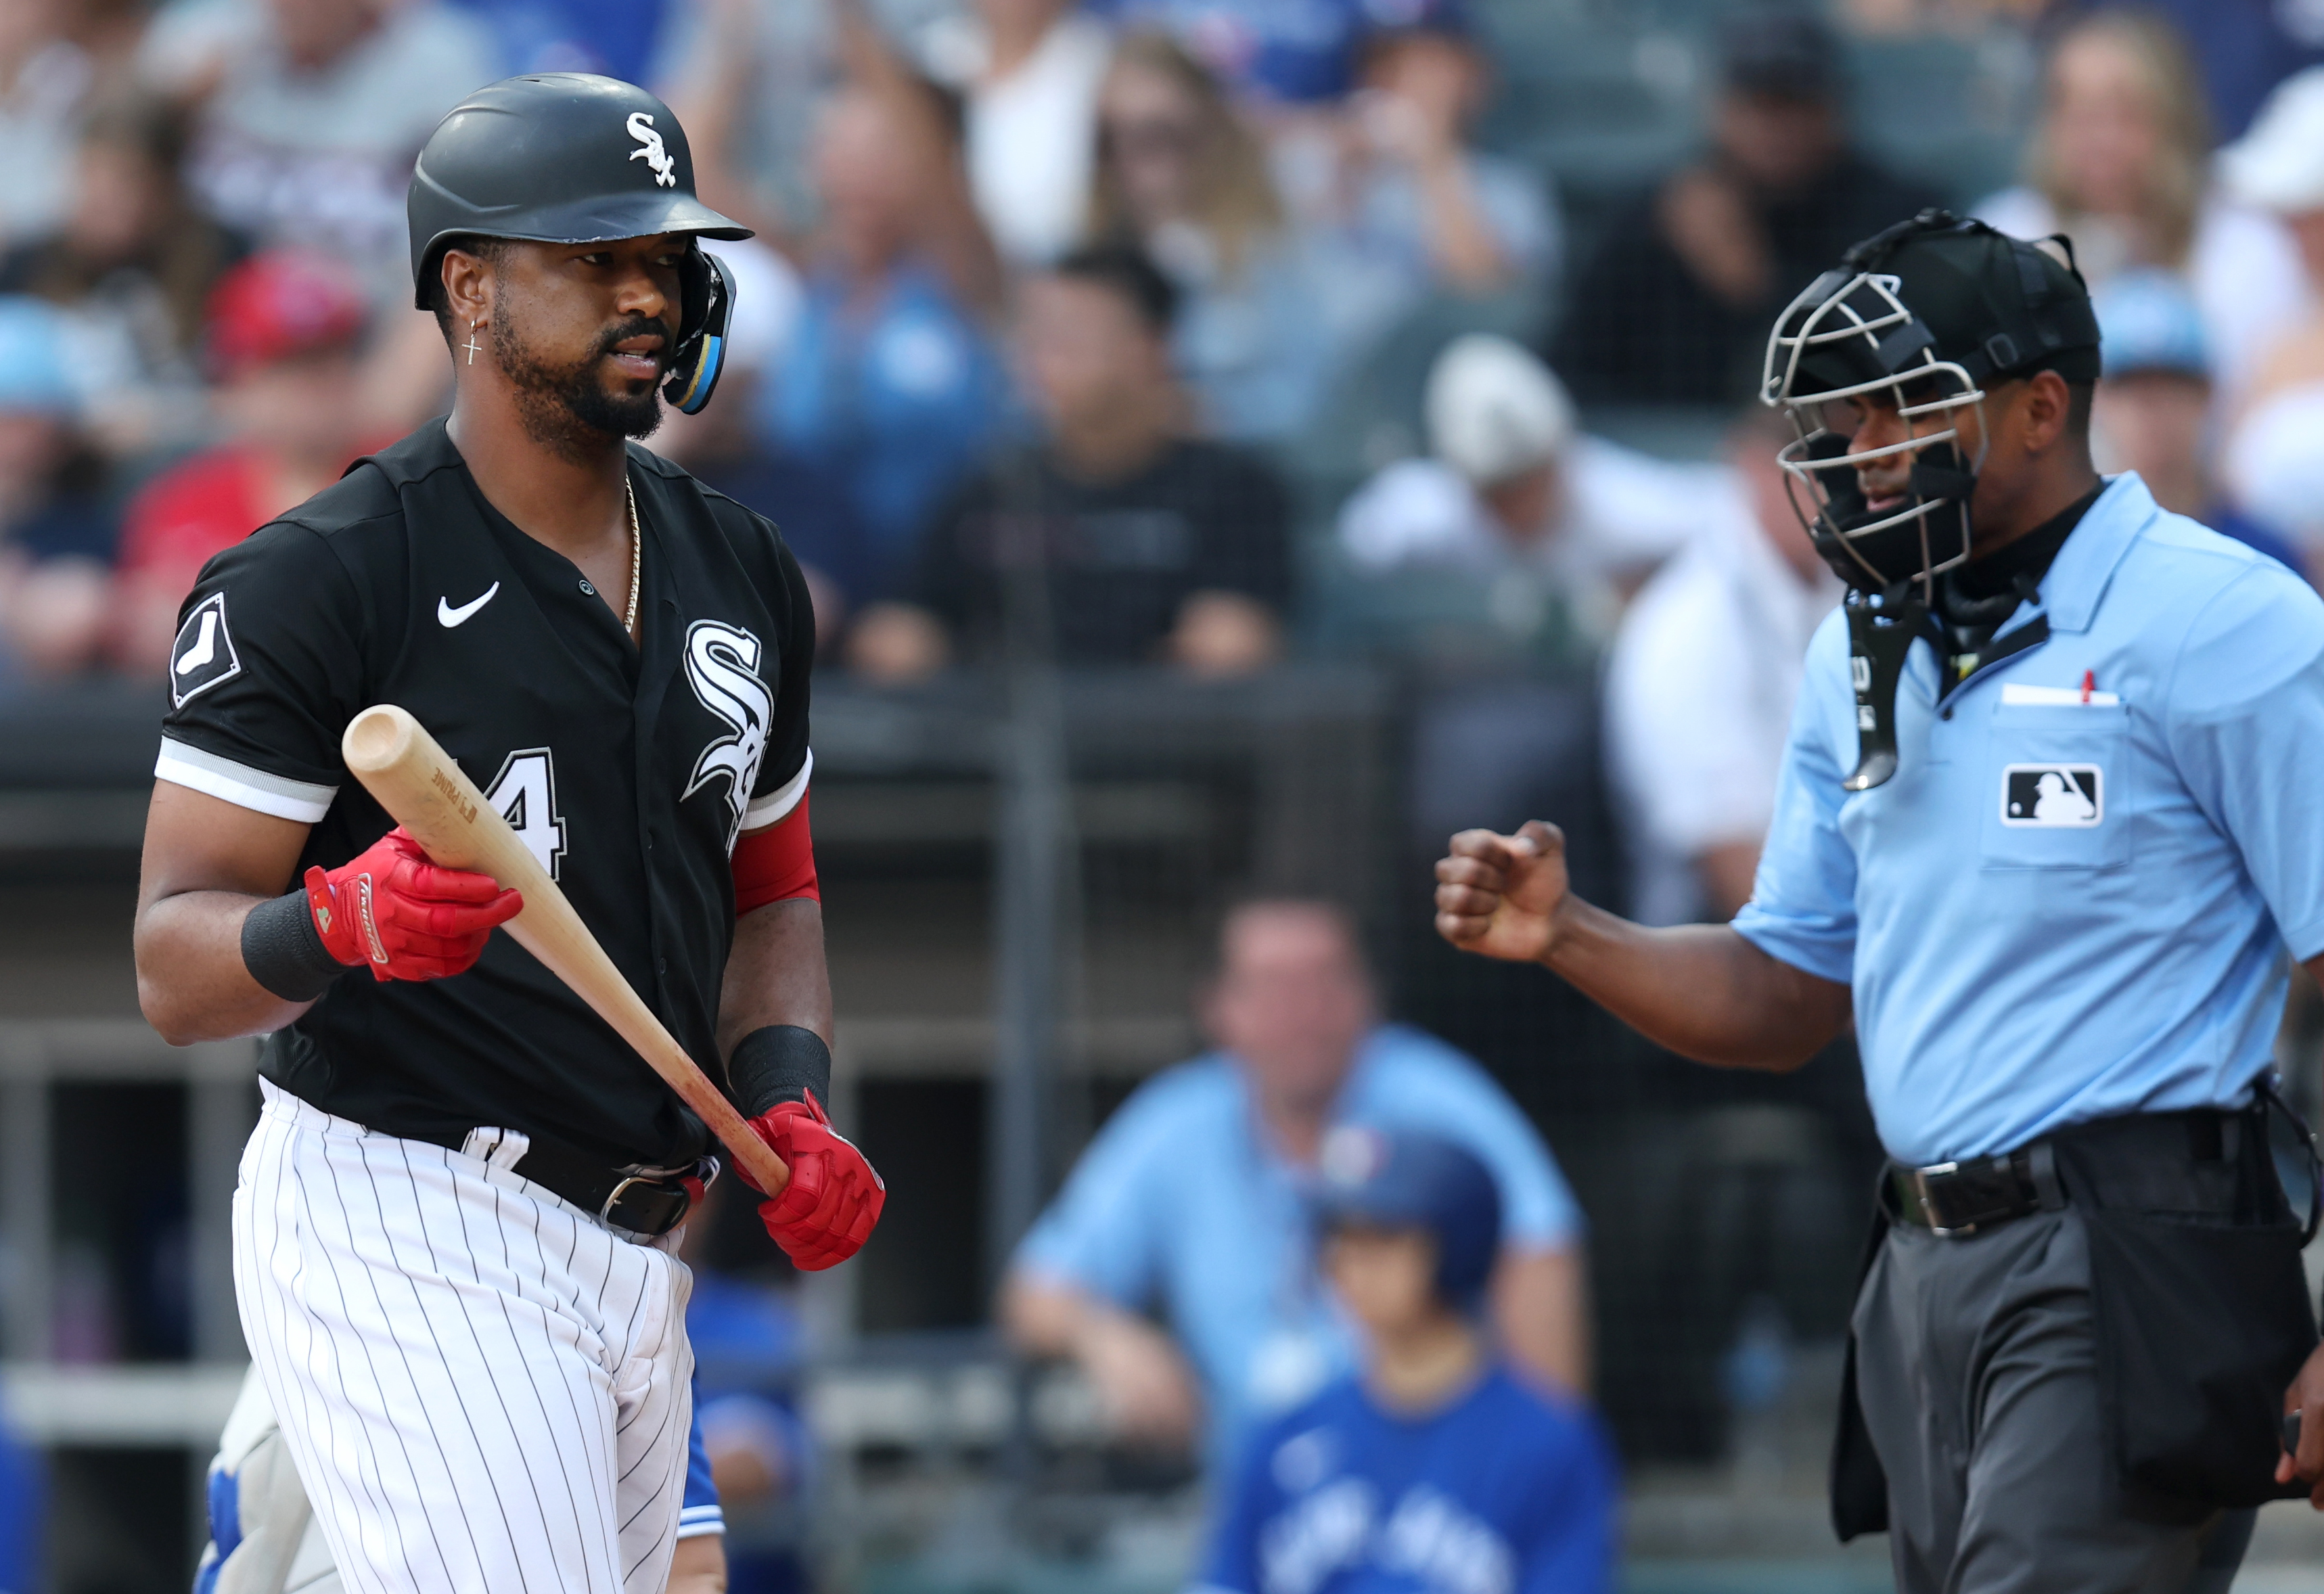 White Sox get swept in a doubleheader by the Blue Jays, National Sports